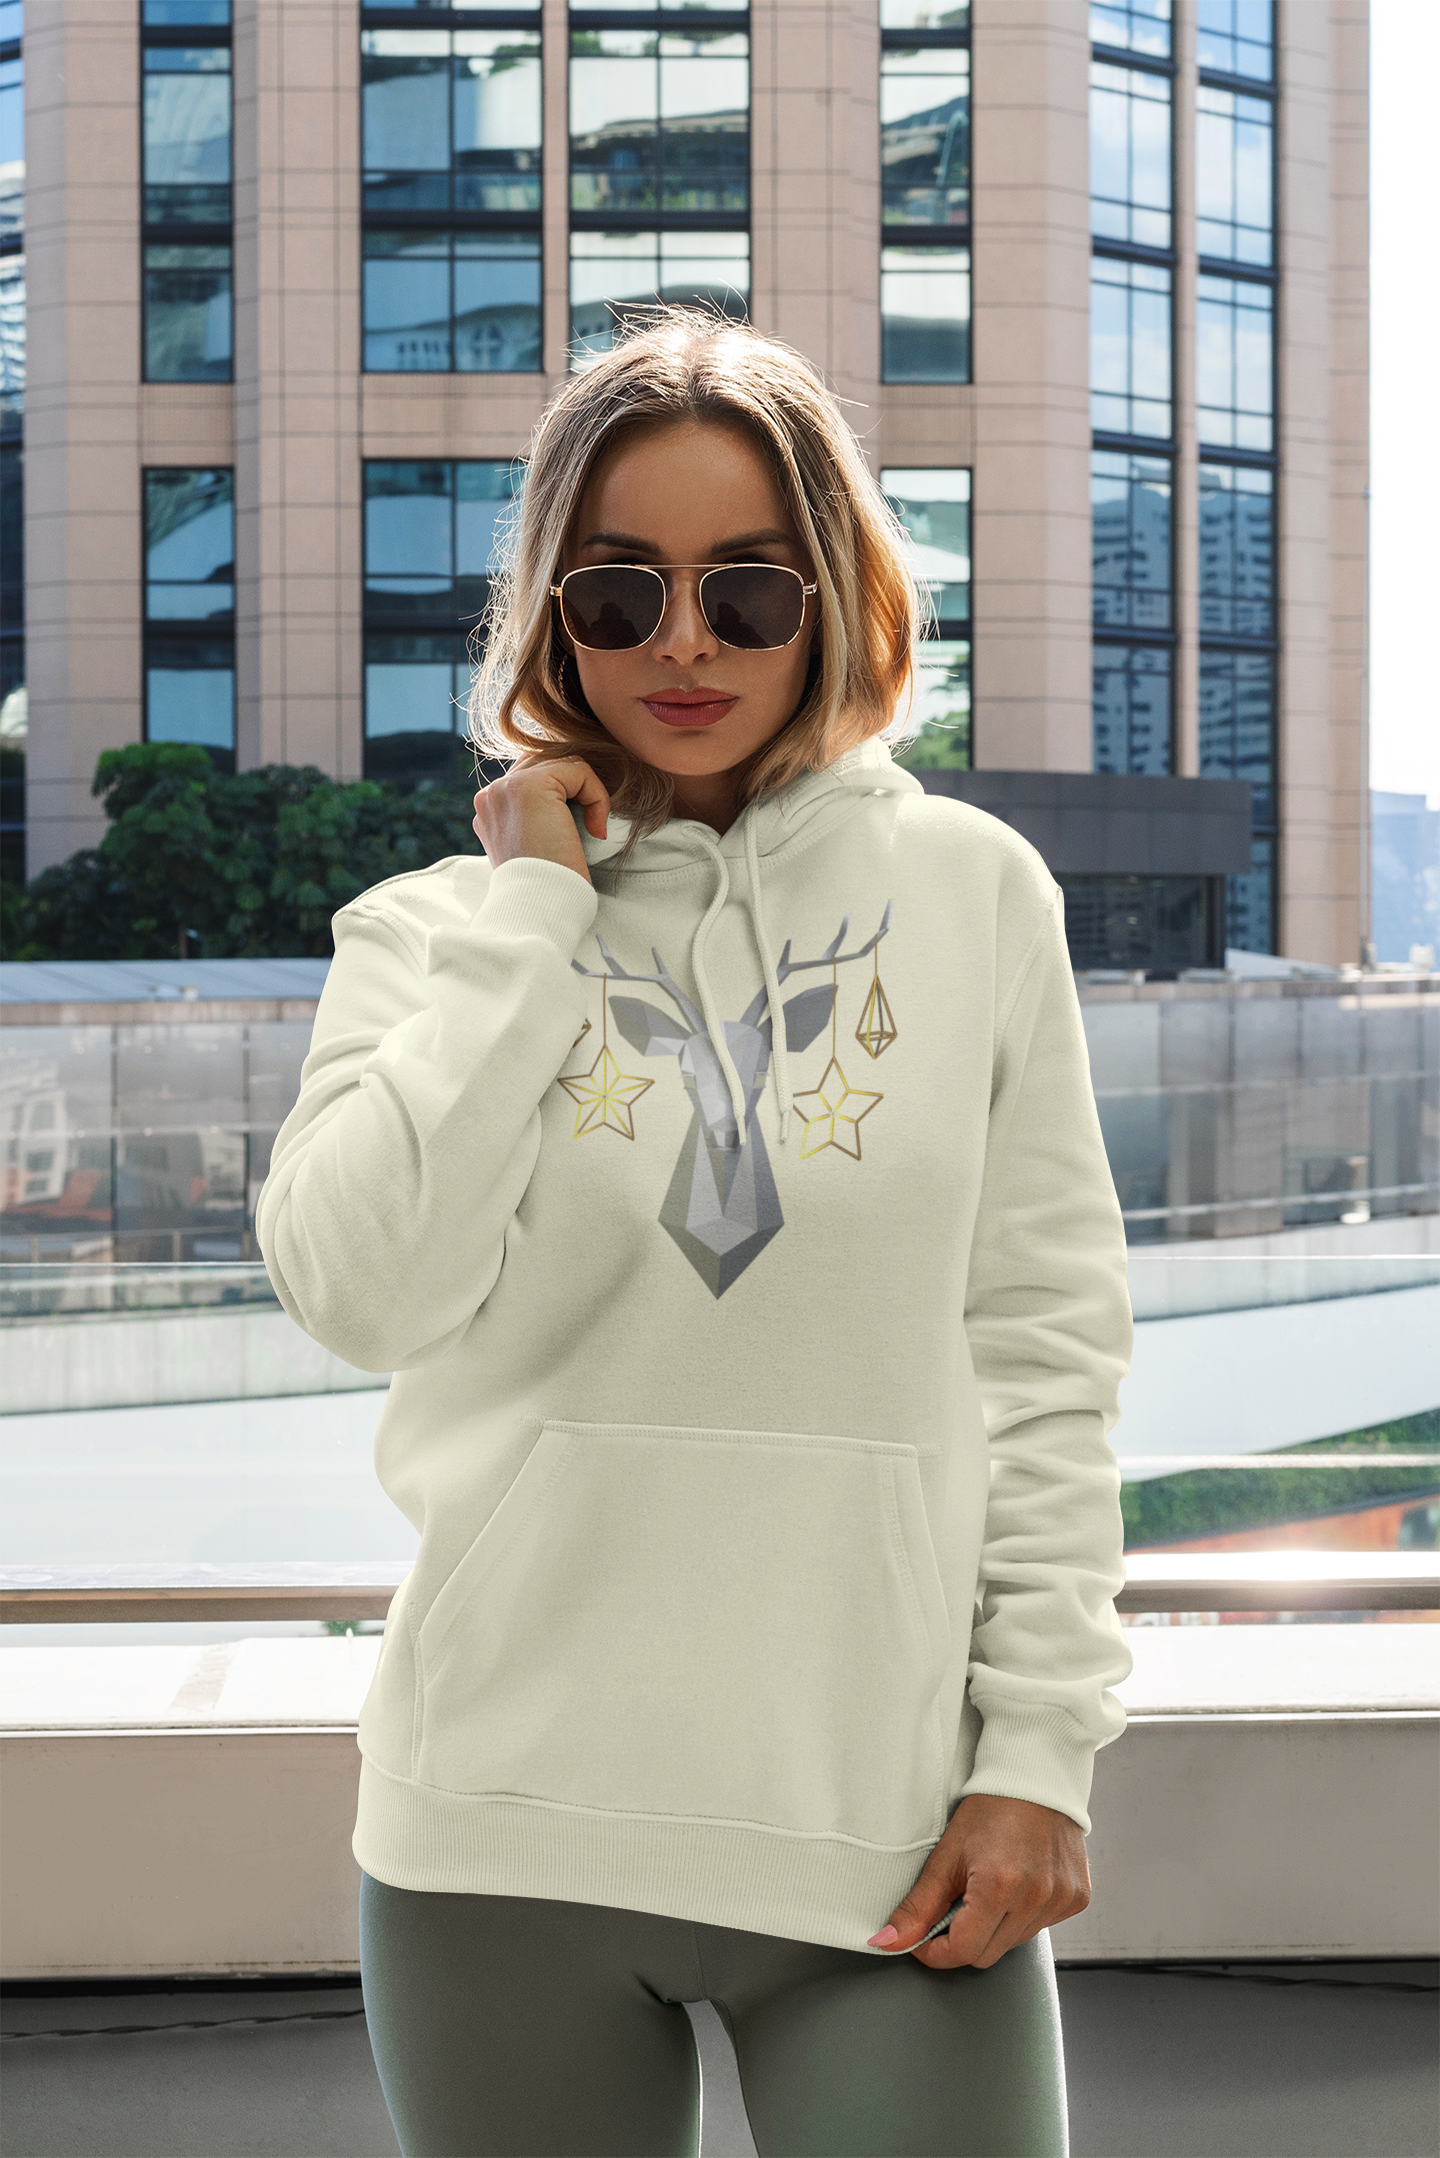 Reindeer Winter White Unisex Hoodie from Vluxe by Lucky Nahum